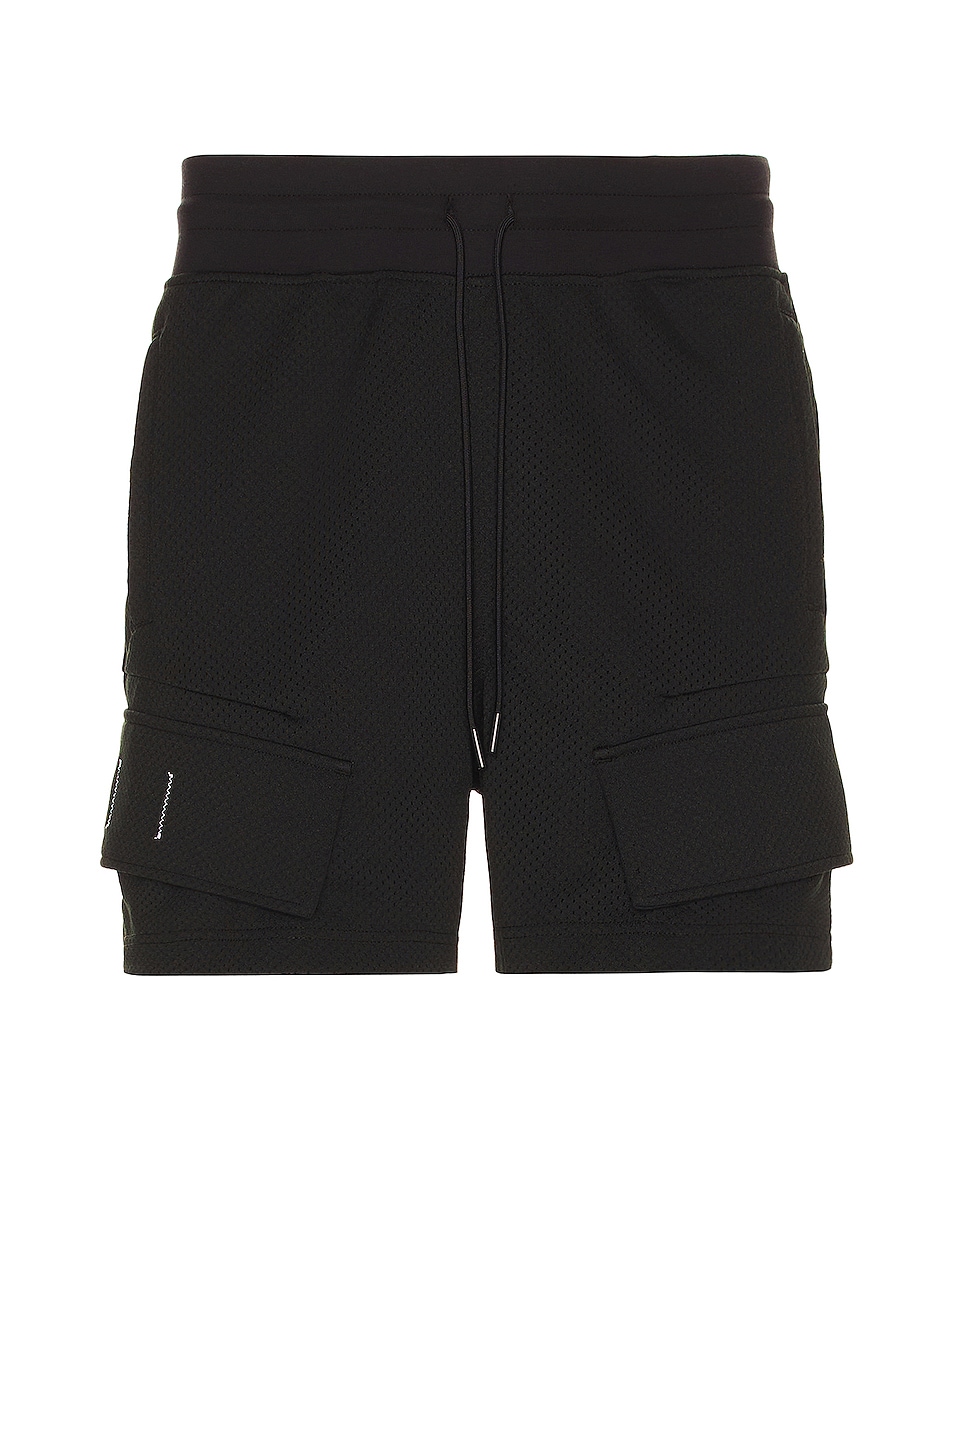 Image 1 of Reigning Champ By Jide Osifeso Cargo Short in Black